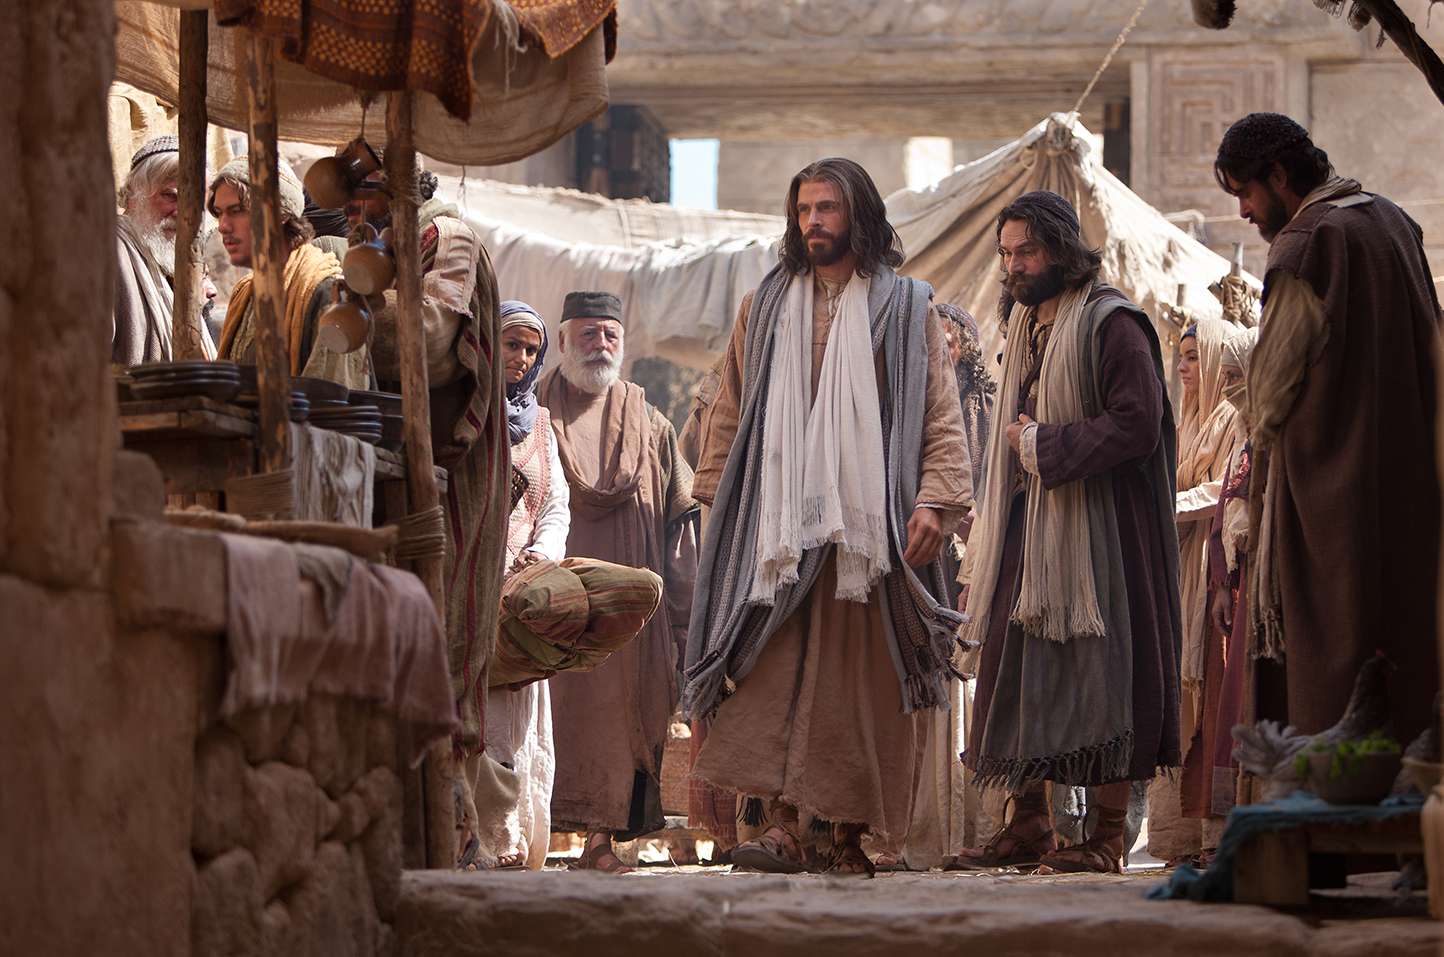 Jesus walking with others